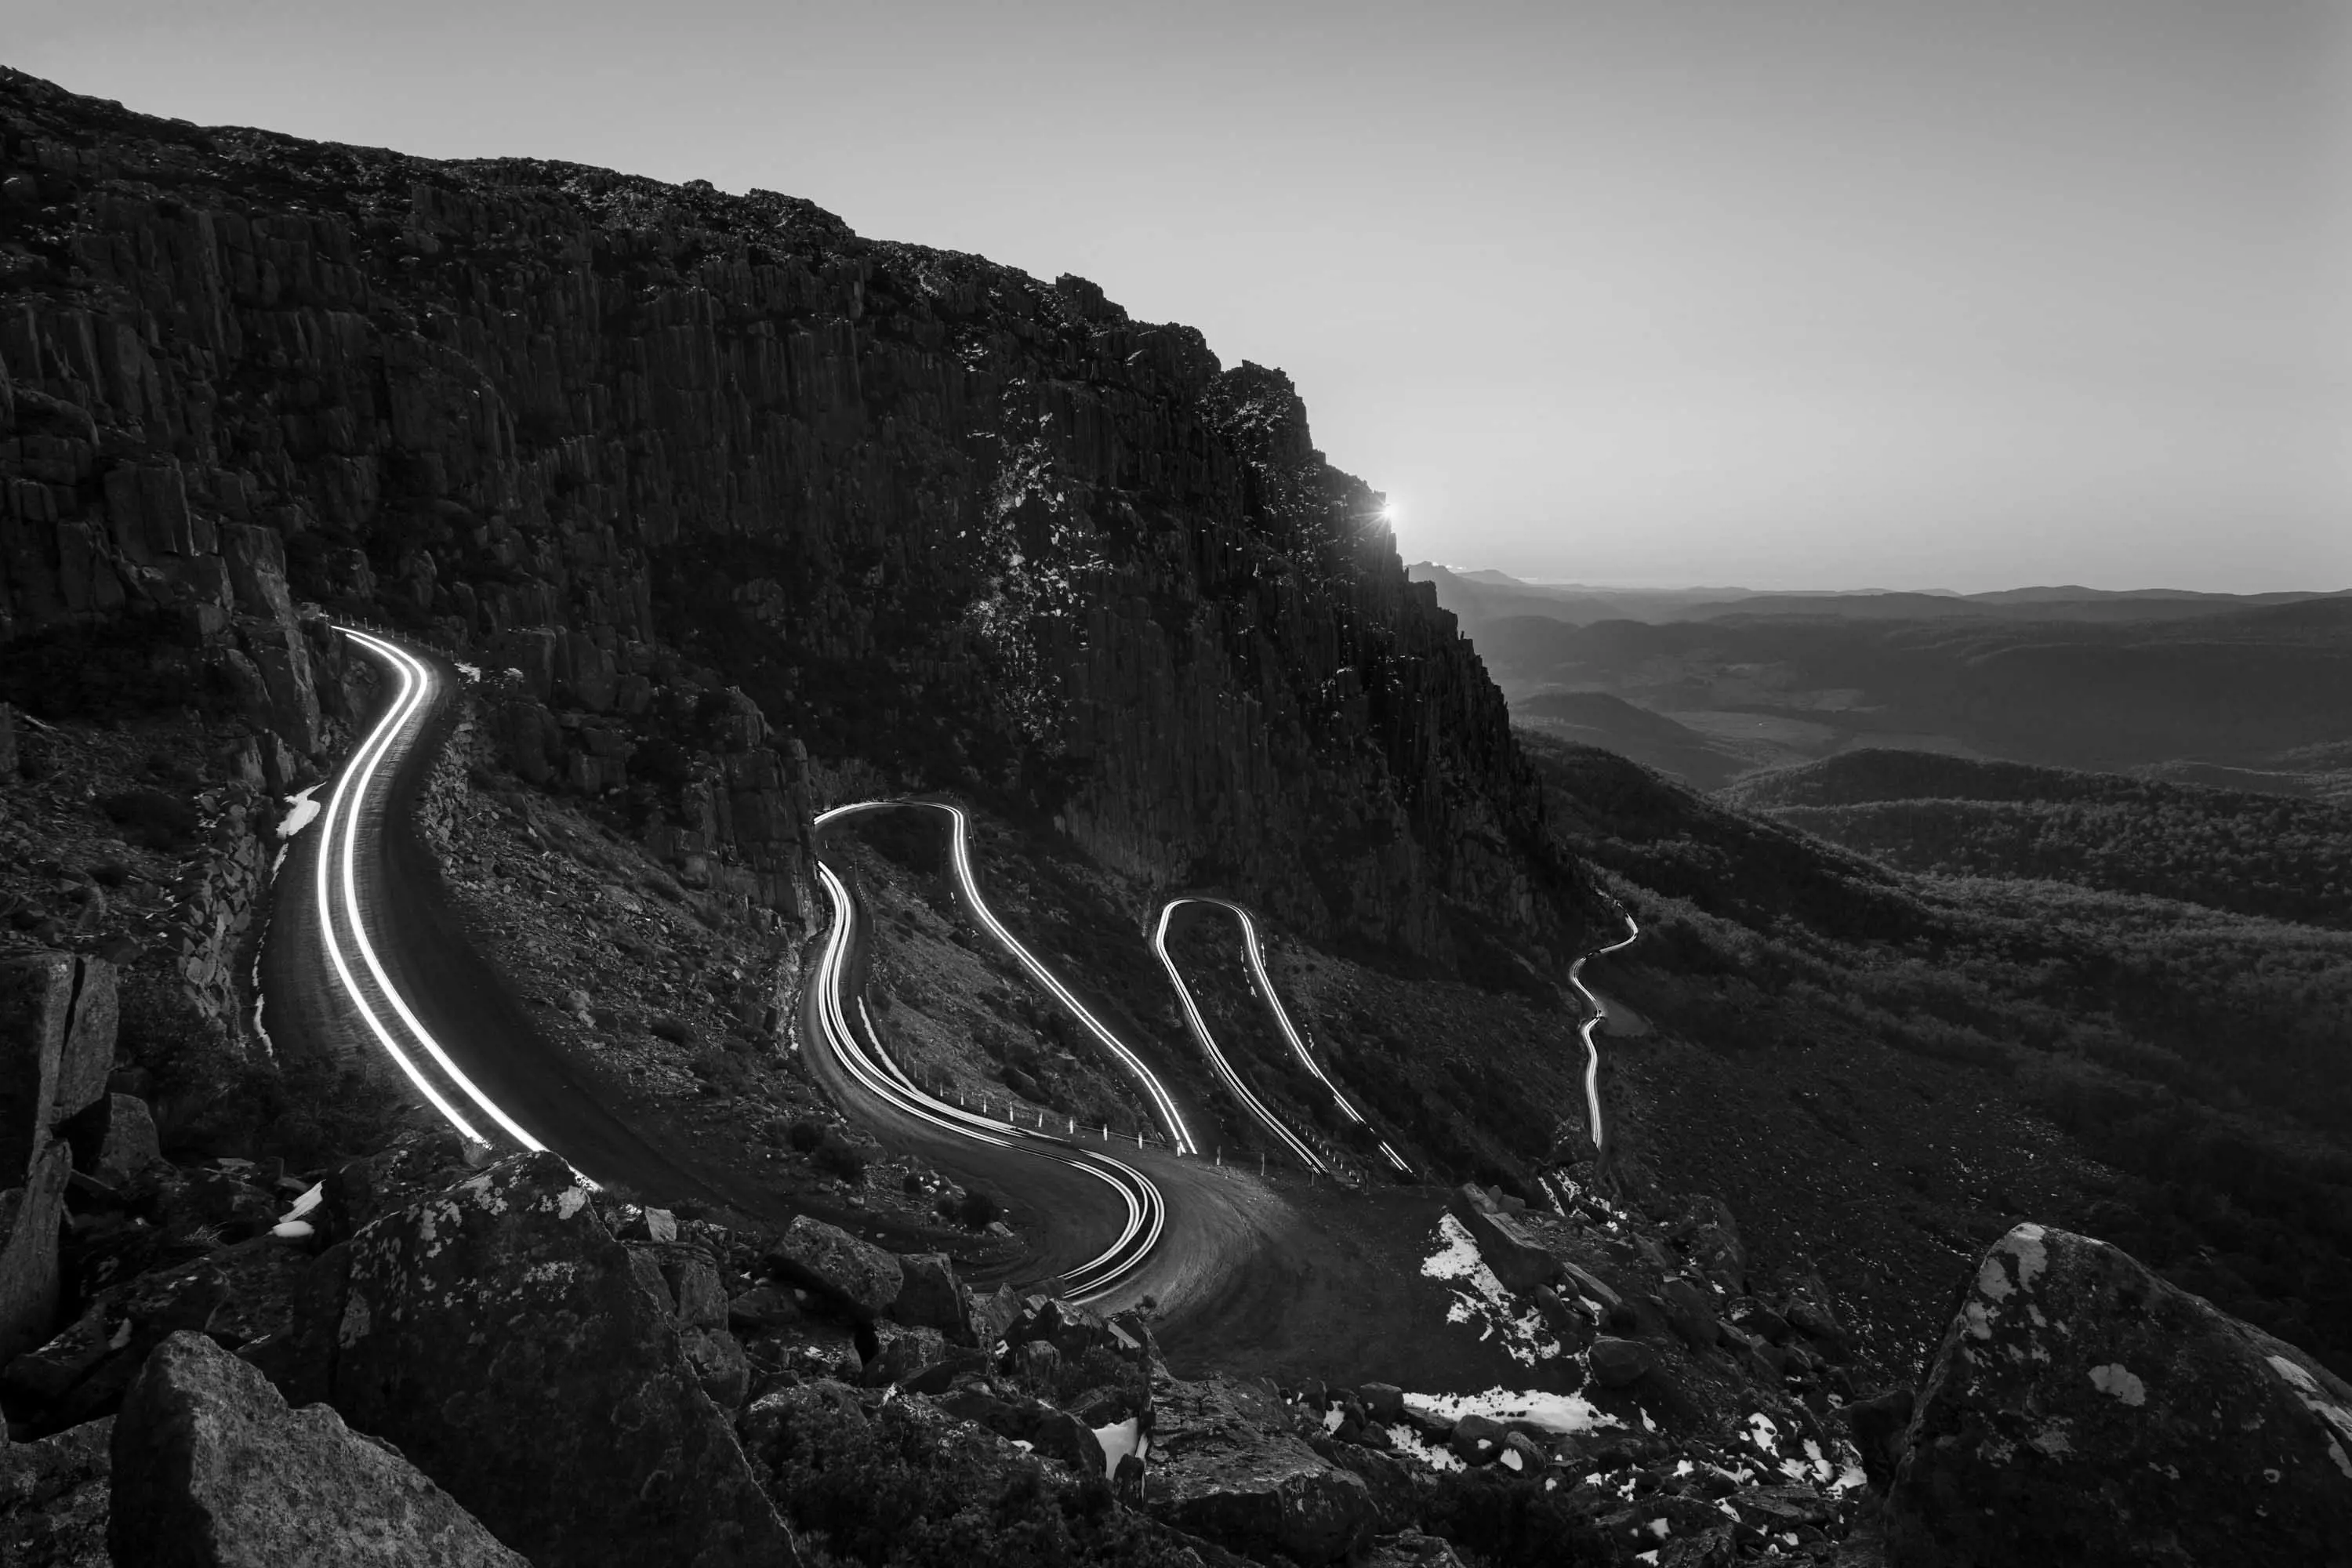 A narrow road winds up a steep mountain face. The long-exposure photograph capturing car's lights as they travel up and down.